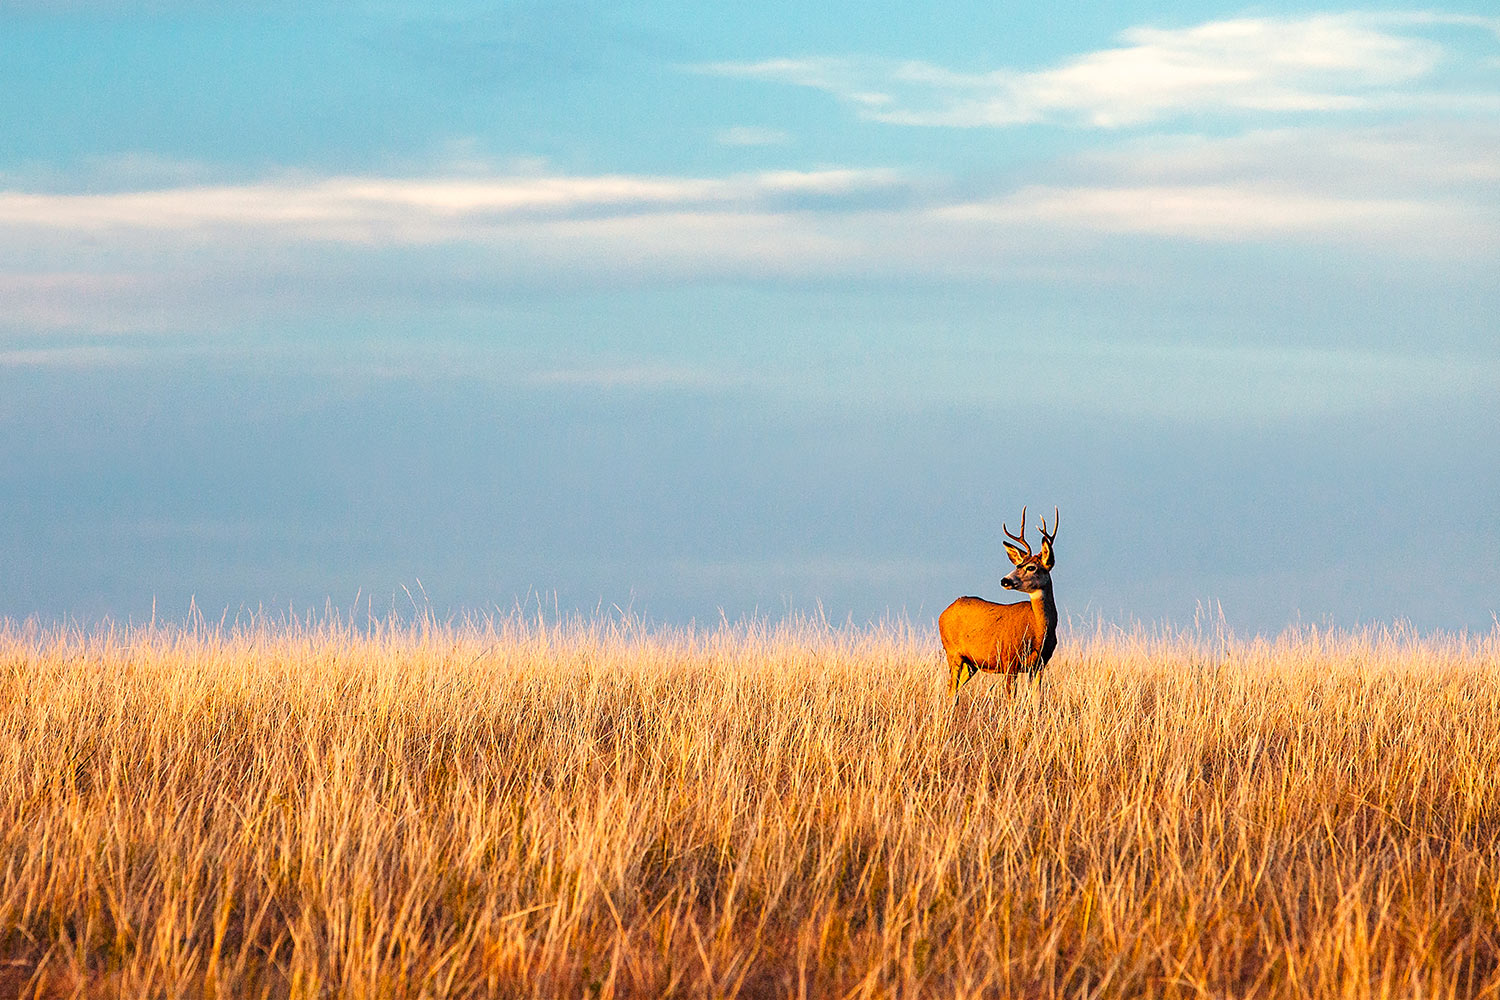 This photo of a deer looking into the setting sun on an autumn day near Fort Peck, Montana was donated to the Blaine County Wildlife Museum for its annual fundraiser auction.&nbsp;→ Buy a Print&nbsp;or License Photo